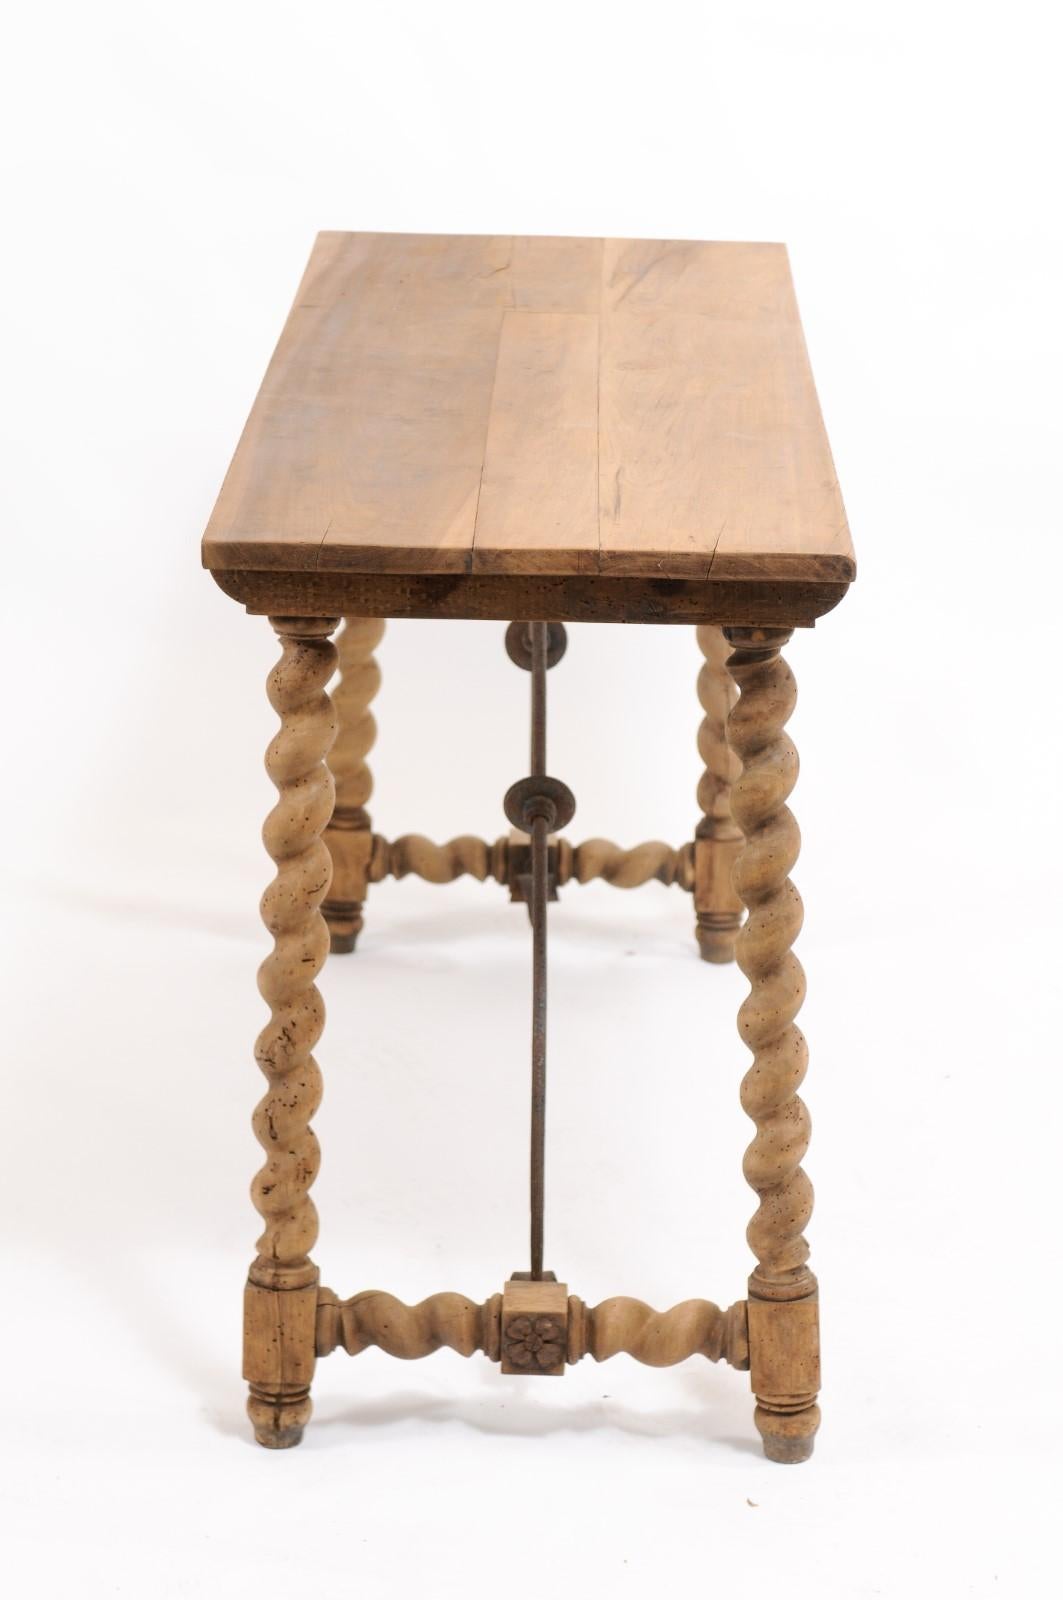 A Spanish Baroque style oak trestle console table from the early 20th century, with barley twist legs and decorative forged-iron stretcher. Born in Spain during the second decade of the 20th century, this exquisite console table features a